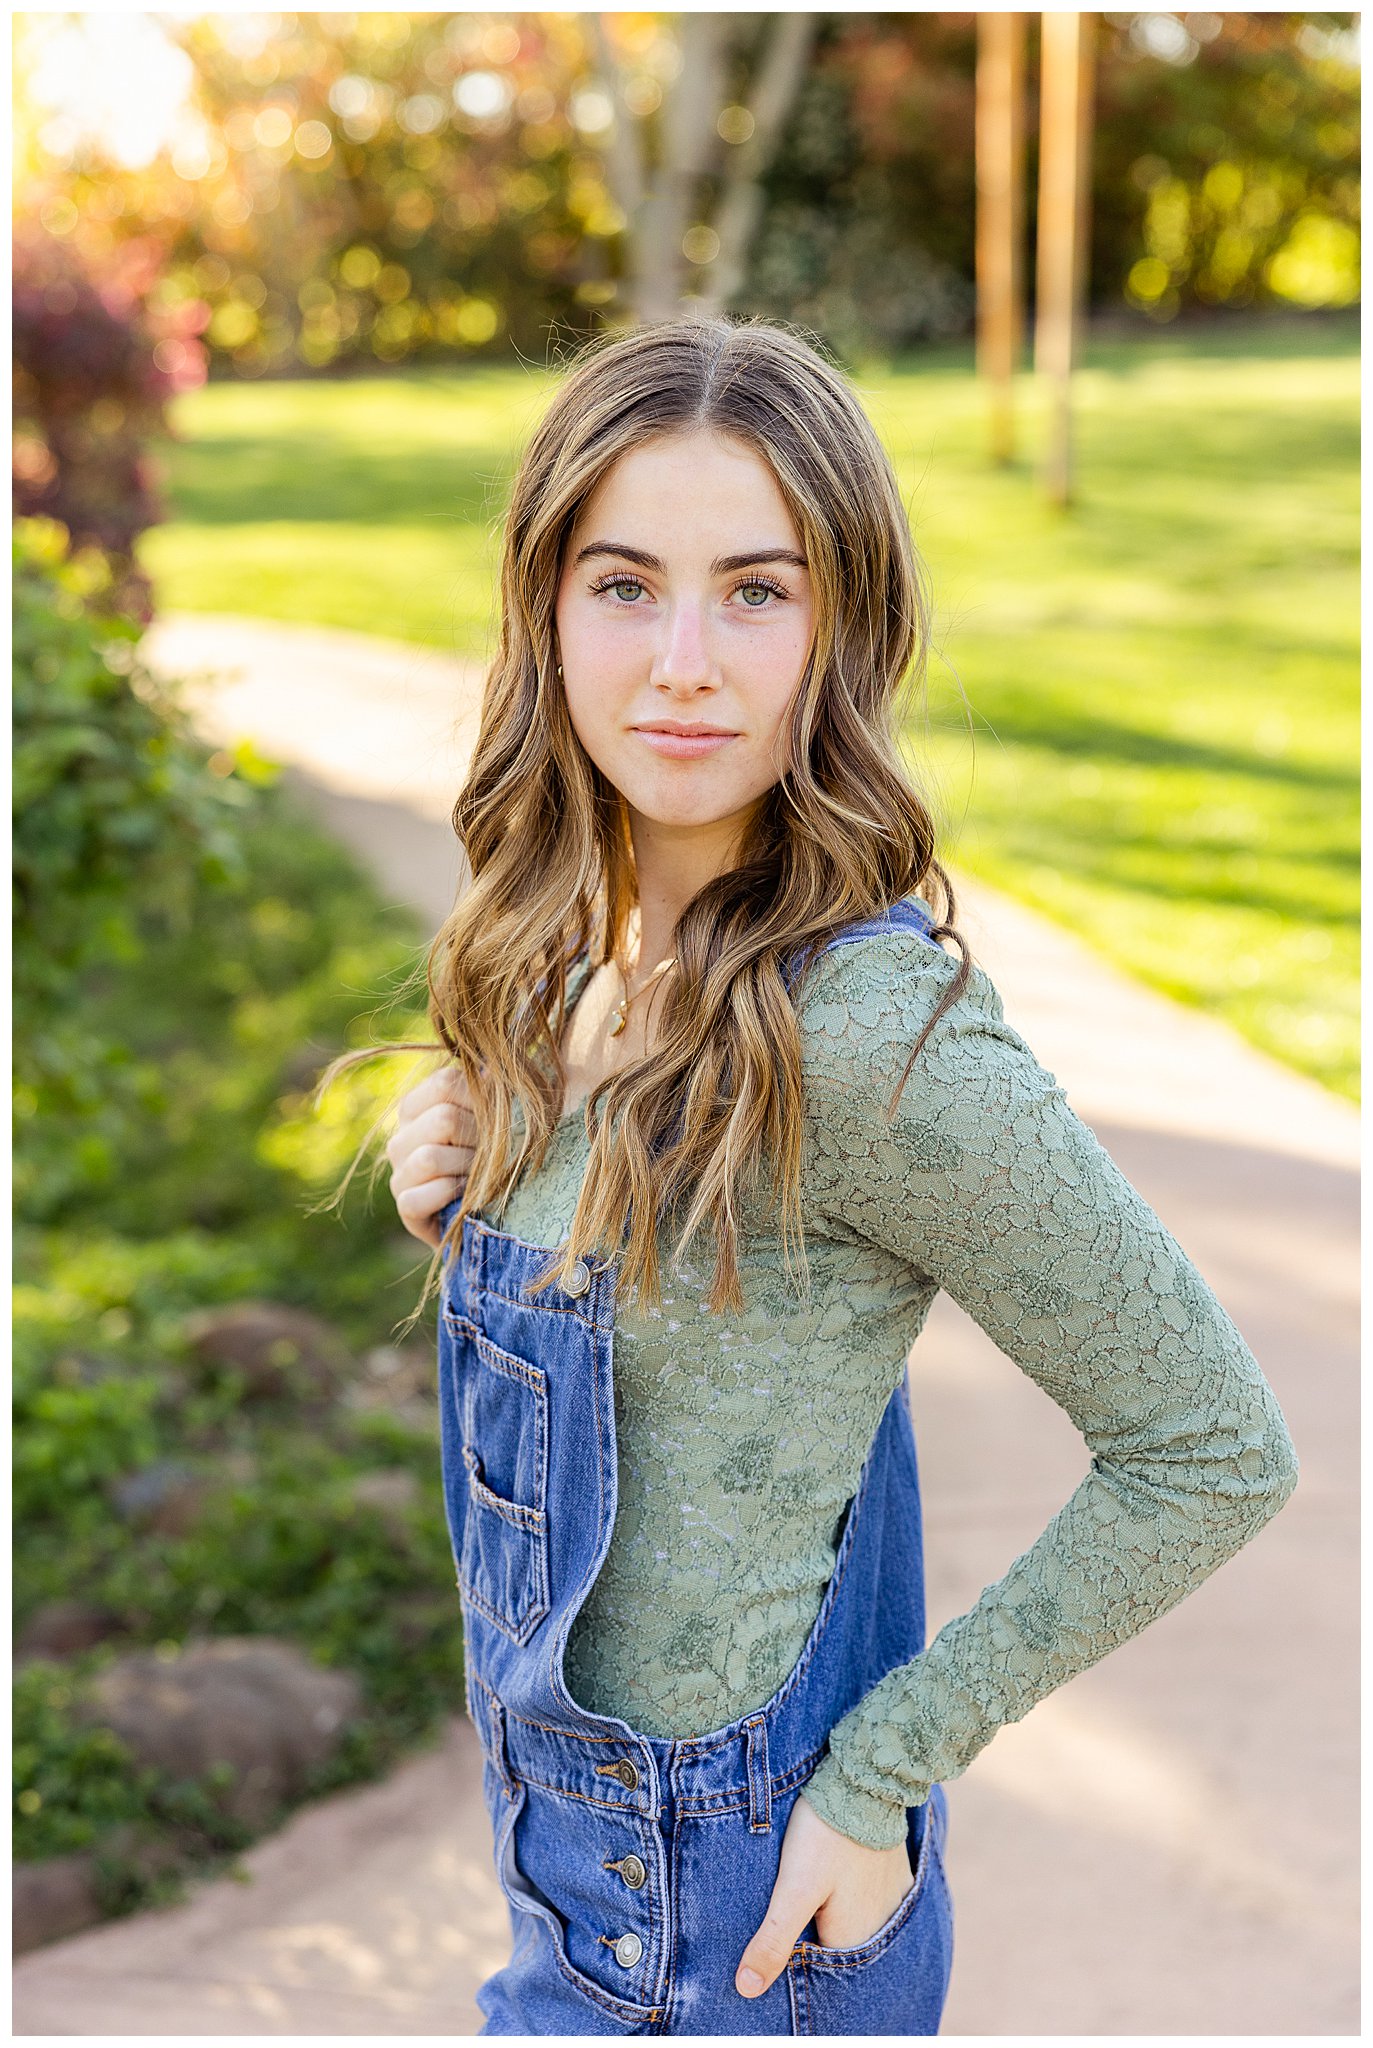 White Ranch Events High School Senior Session Chico CA Willow Tree Field Overalls Floral Dress Arch,